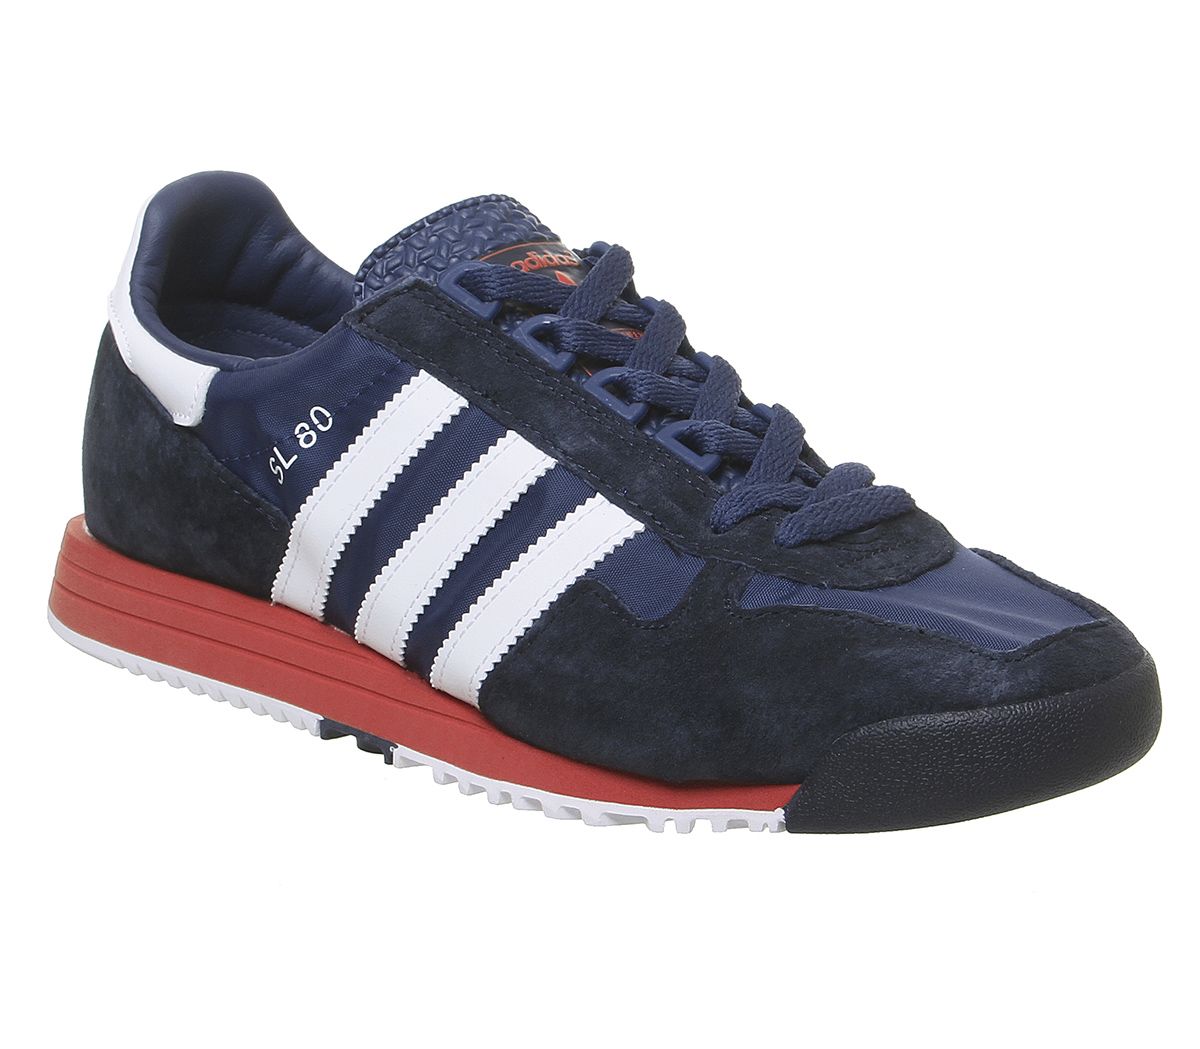 adidas Sl 80 Trainers Tech Indigo White Legend Ink - His trainers